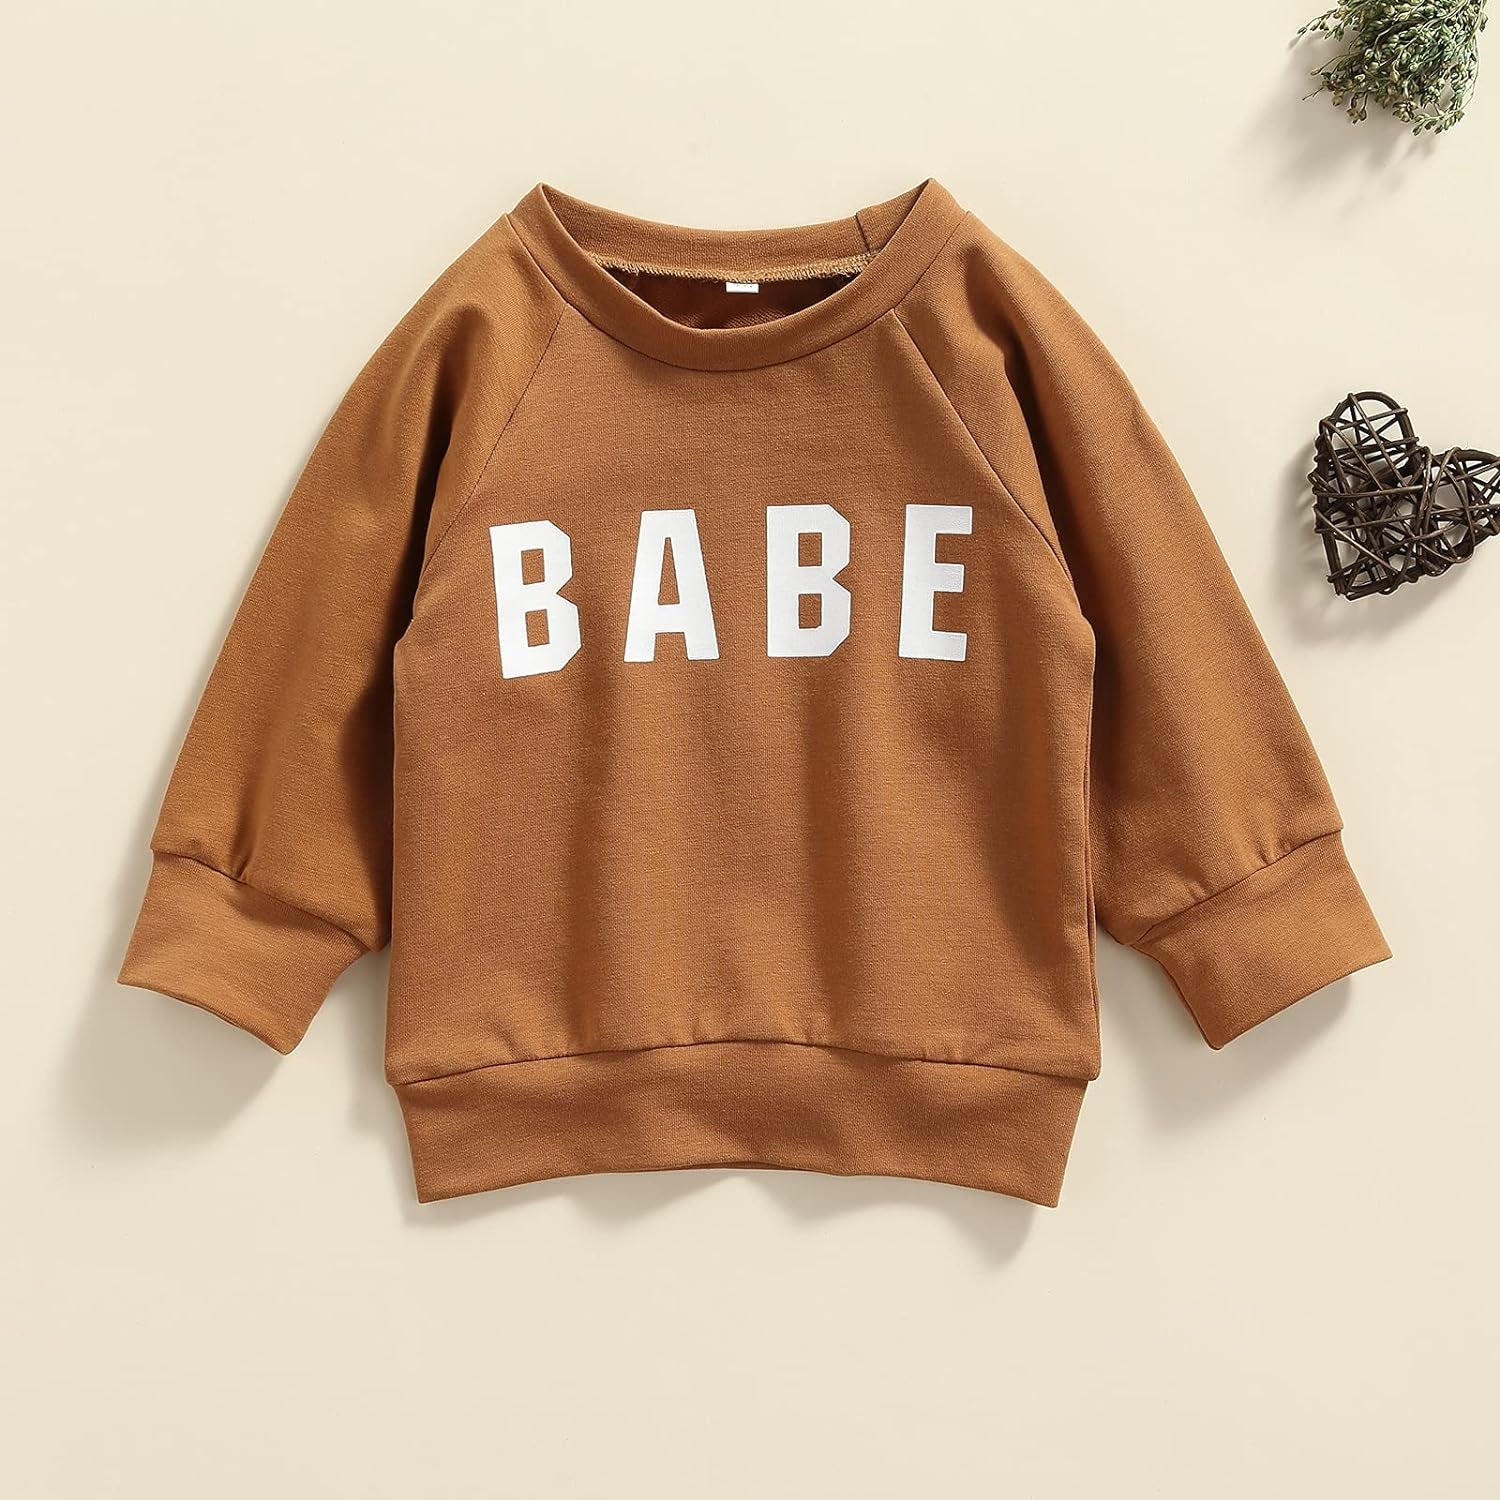 Toddler Baby Boy Girl Valentines Day Outfit 9 12 18 24Months 2T 3T 4T 5T Sweatshirt Sweater Top Shirt Clothes